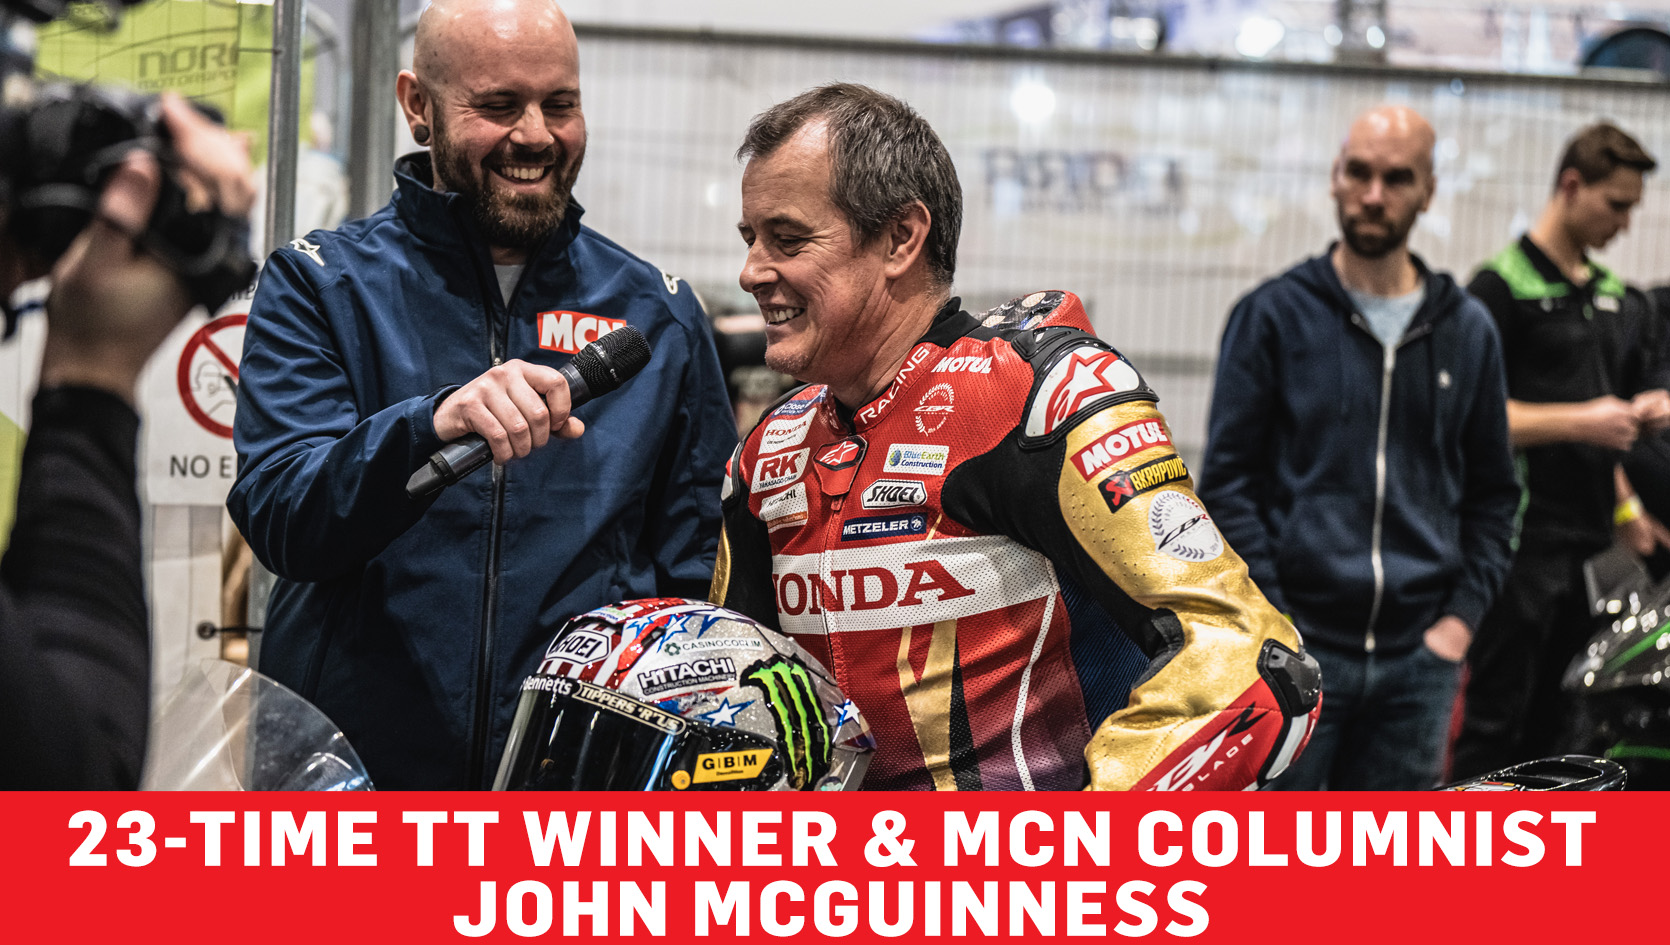 John McGuinness will appear at the 2024 Devitt Insurance MCN London Motorcycle Show